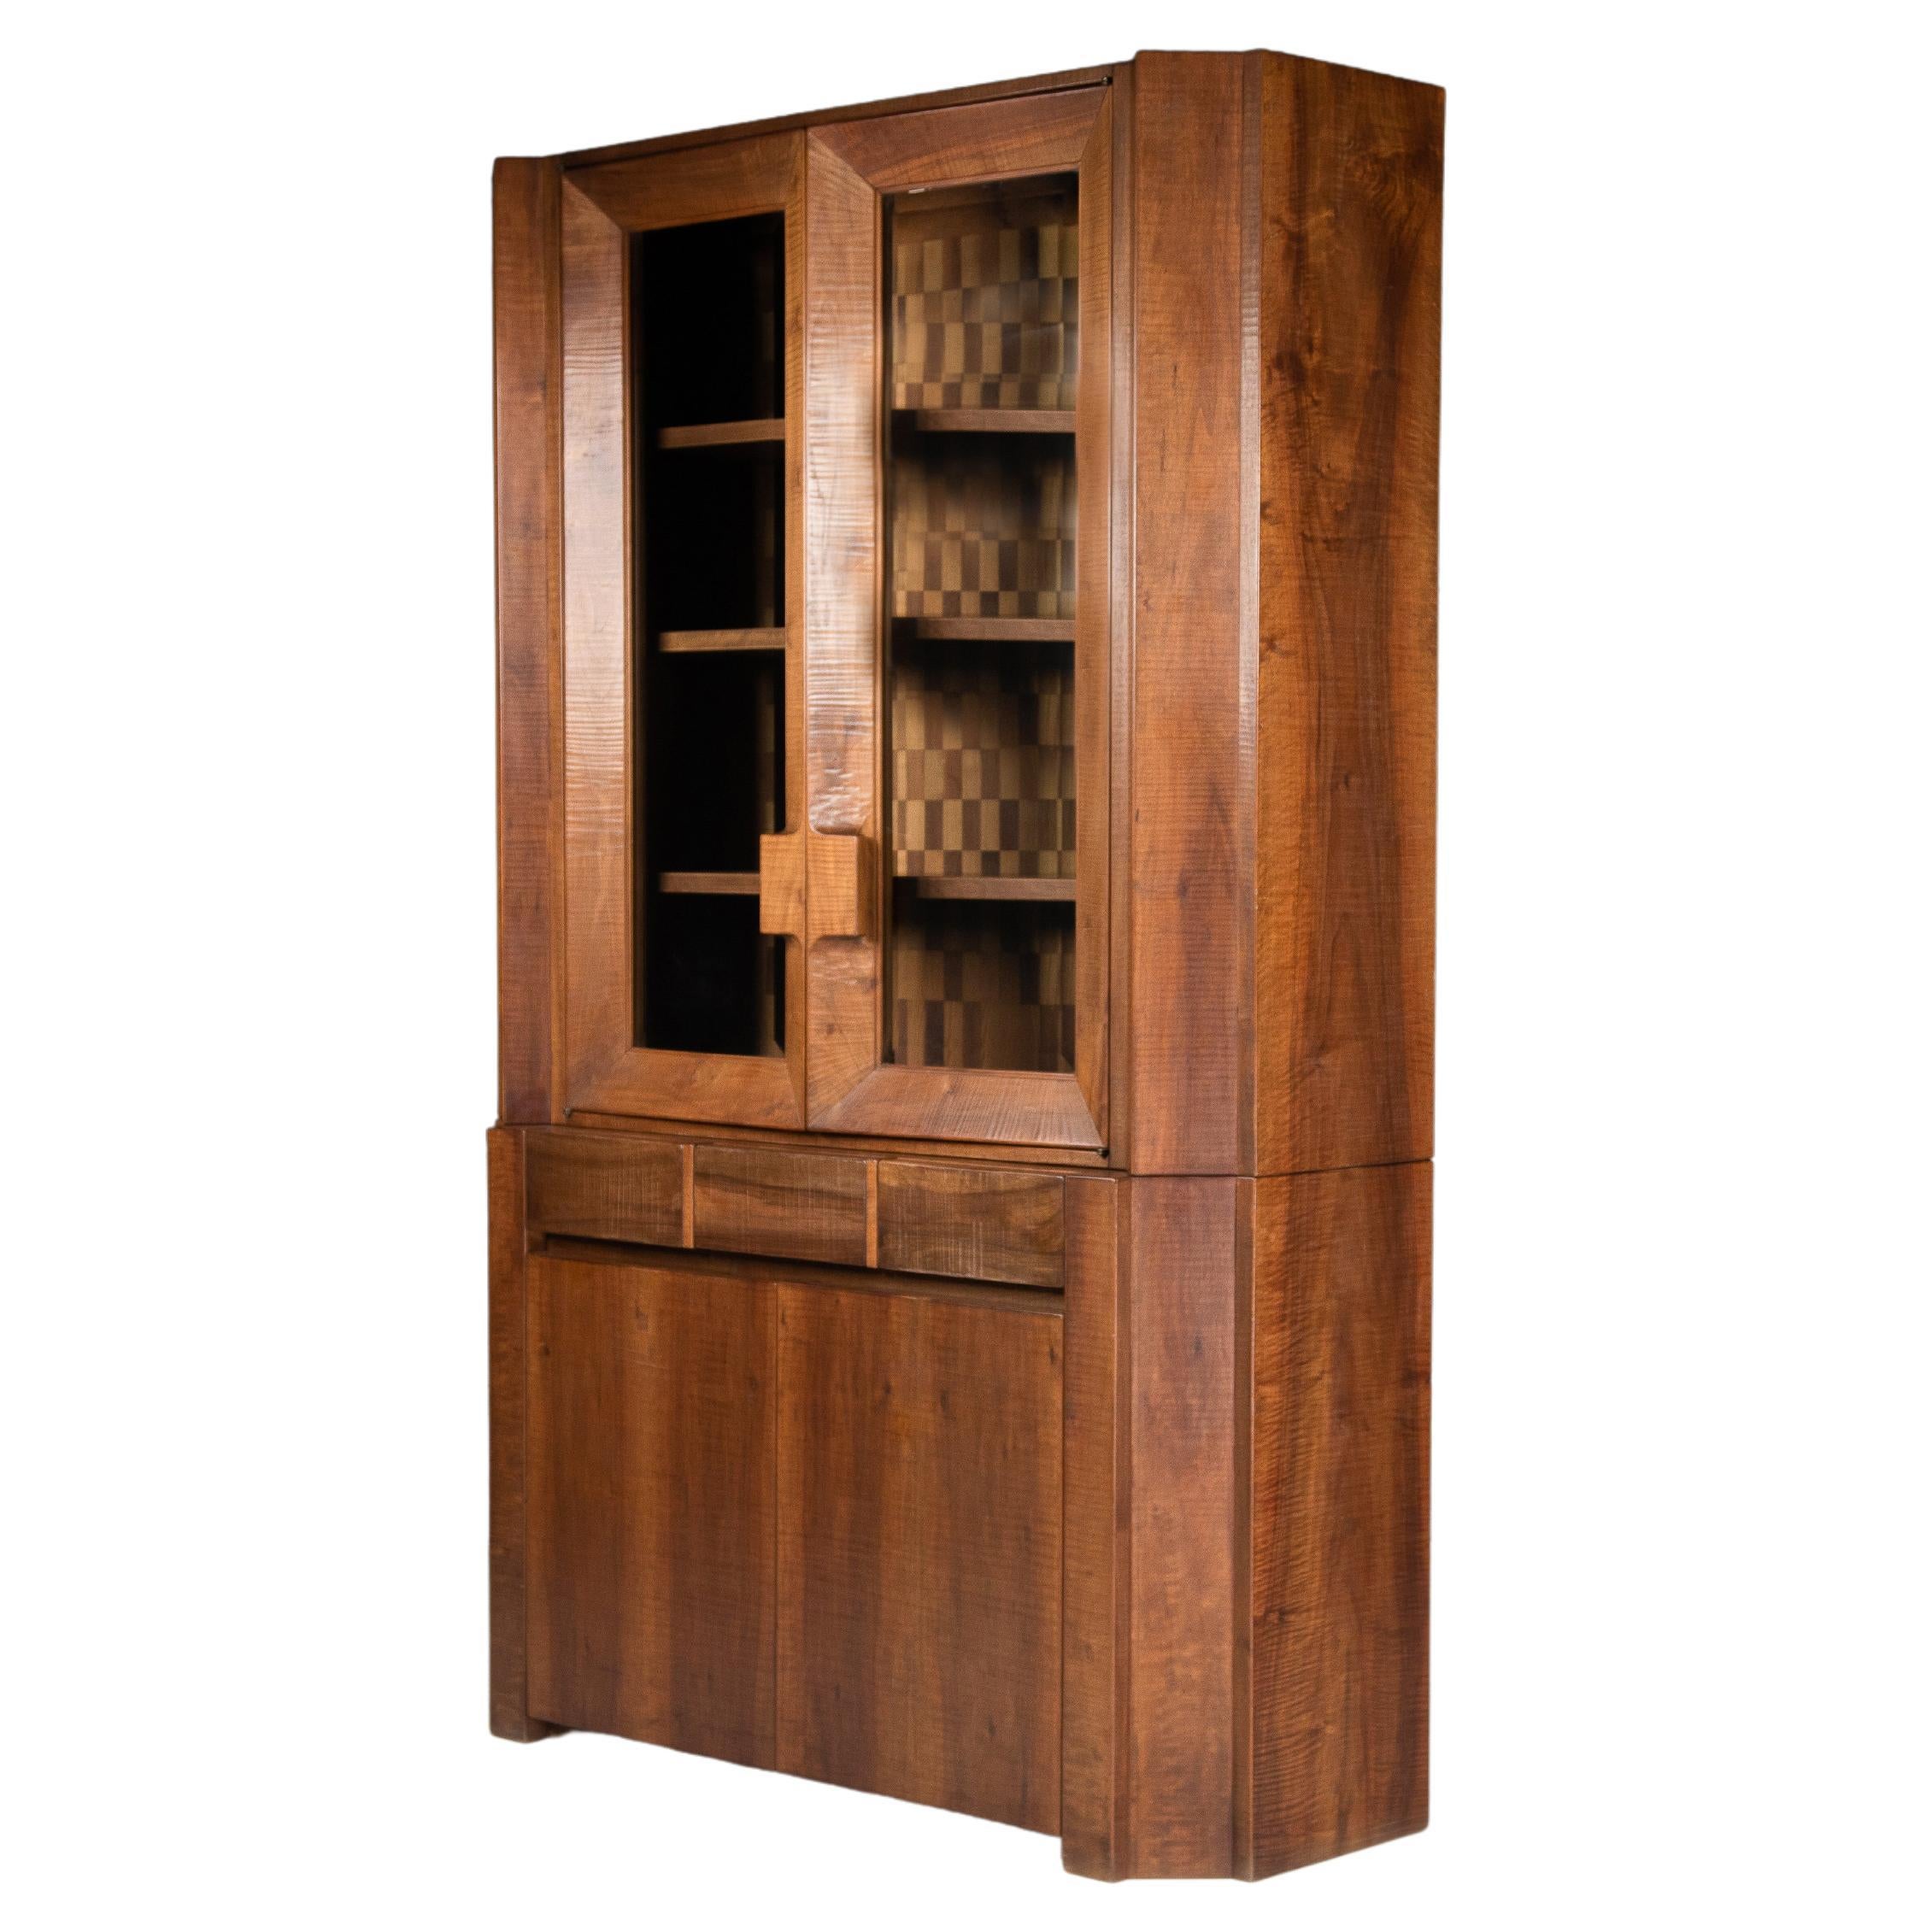 Giuseppe Rivadossi Tall Glazed Cabinet in Walnut, Italy 1970s For Sale